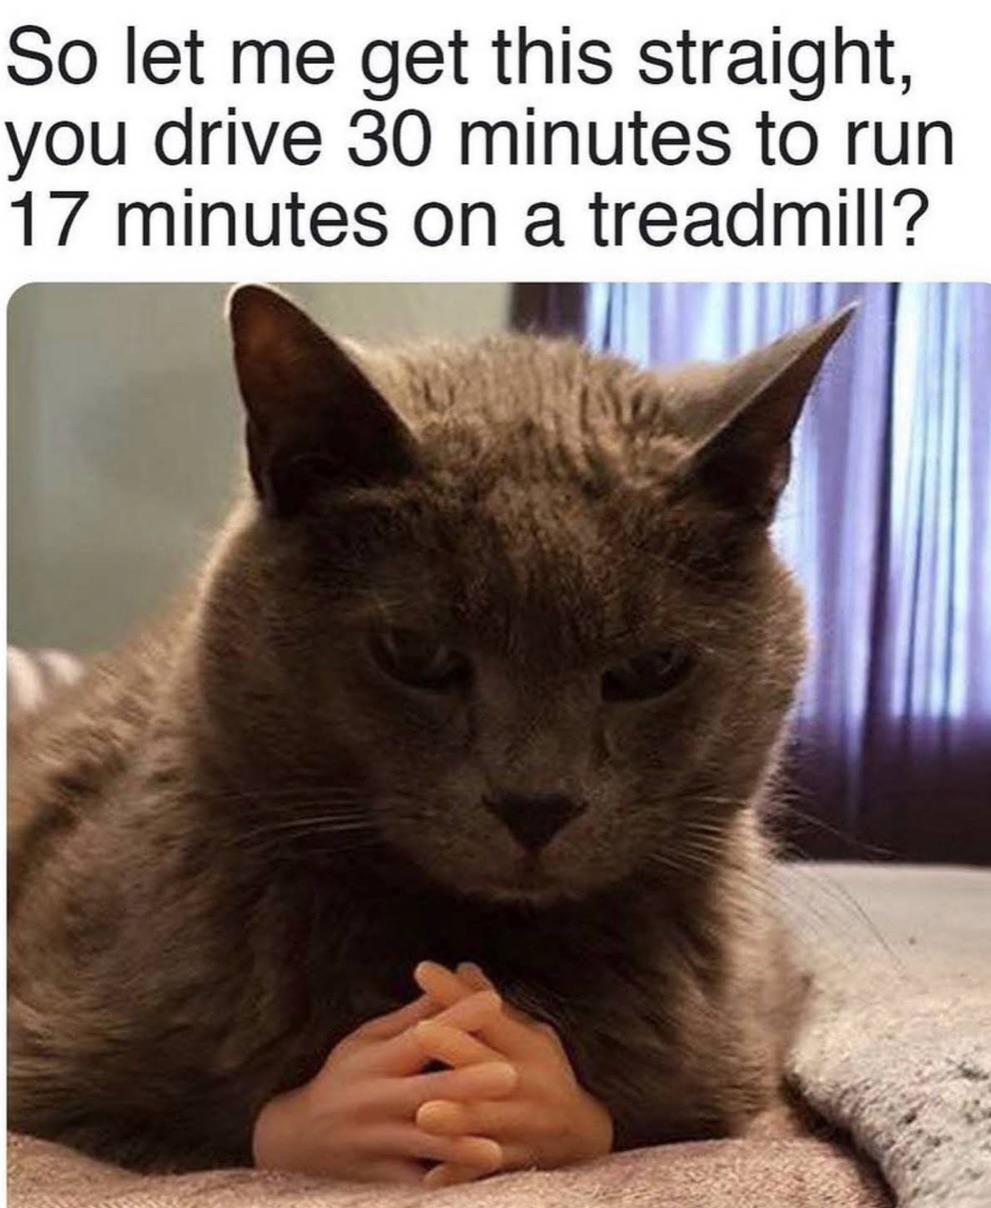 funny memes - you like this facebook - So let me get this straight, you drive 30 minutes to run 17 minutes on a treadmill?